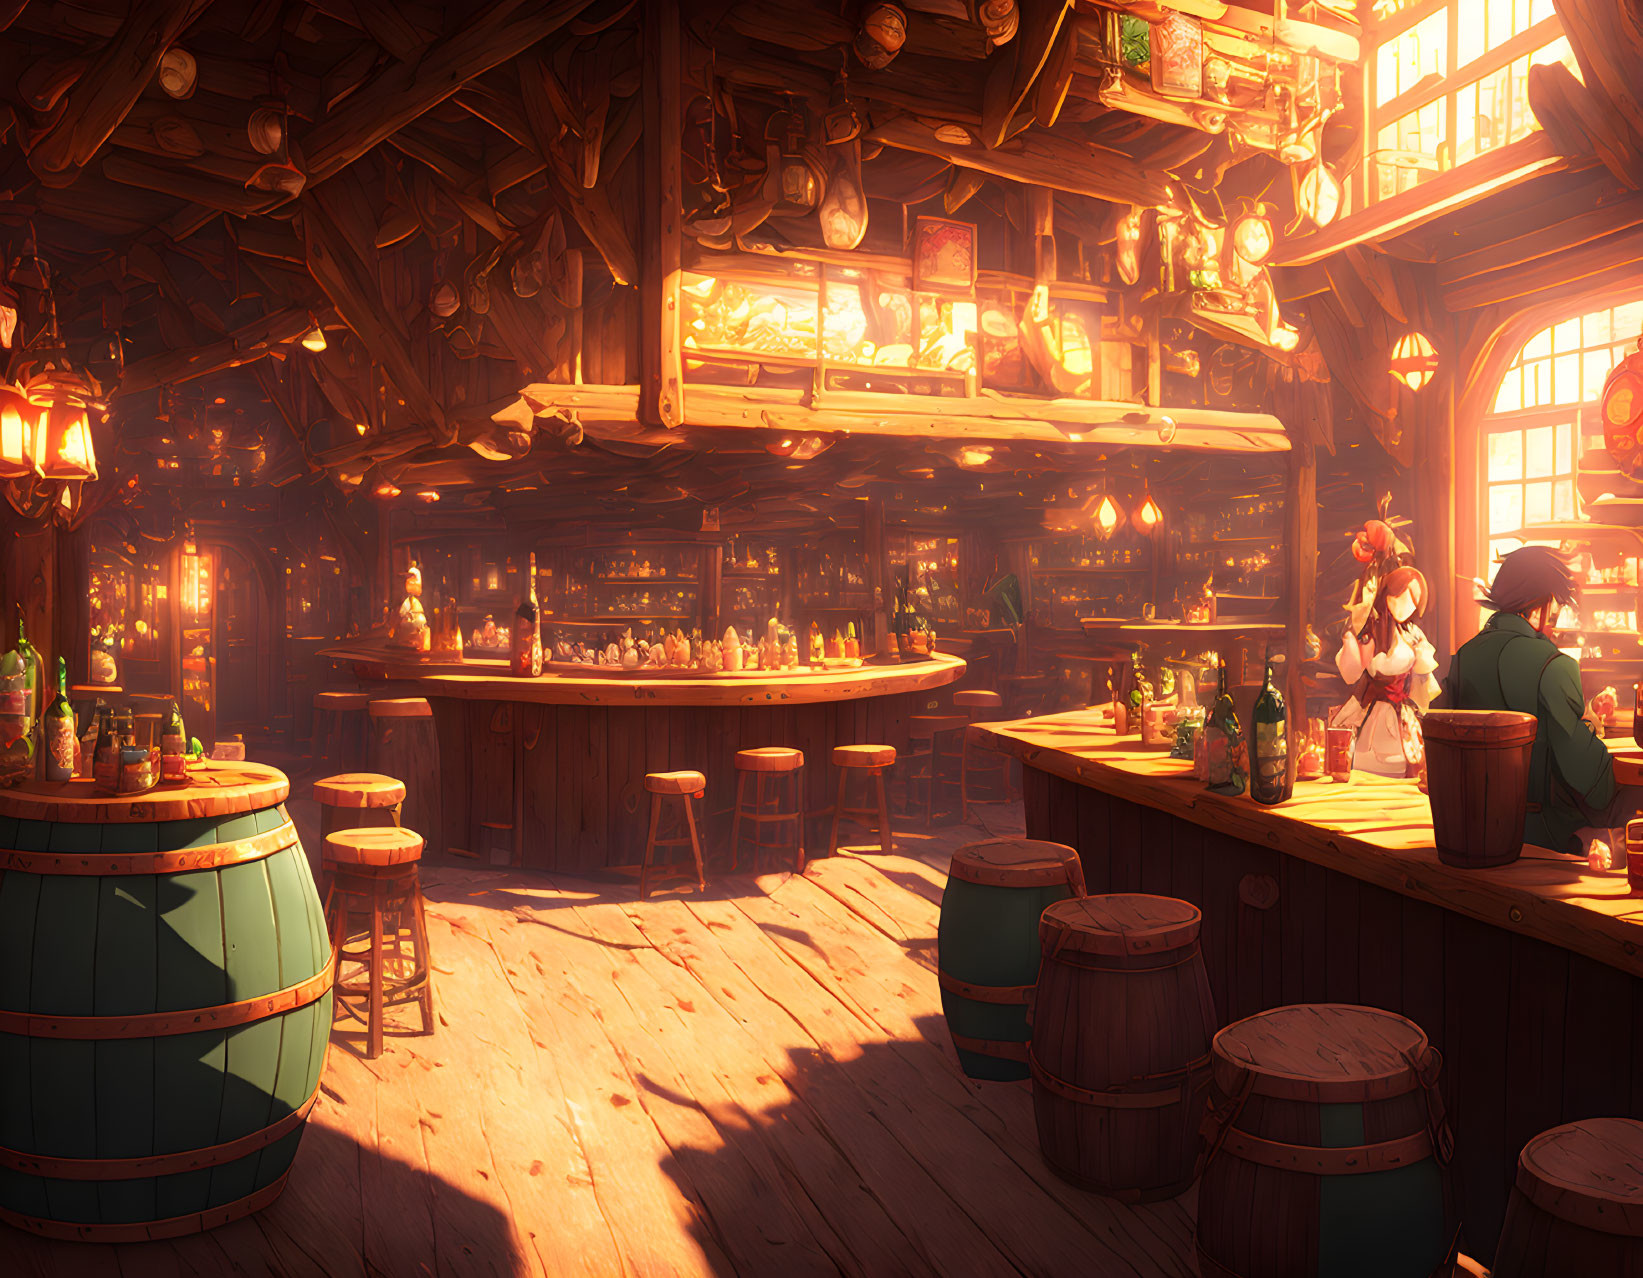 Rustic tavern interior with wooden beams, bar, patrons, and sunlight.